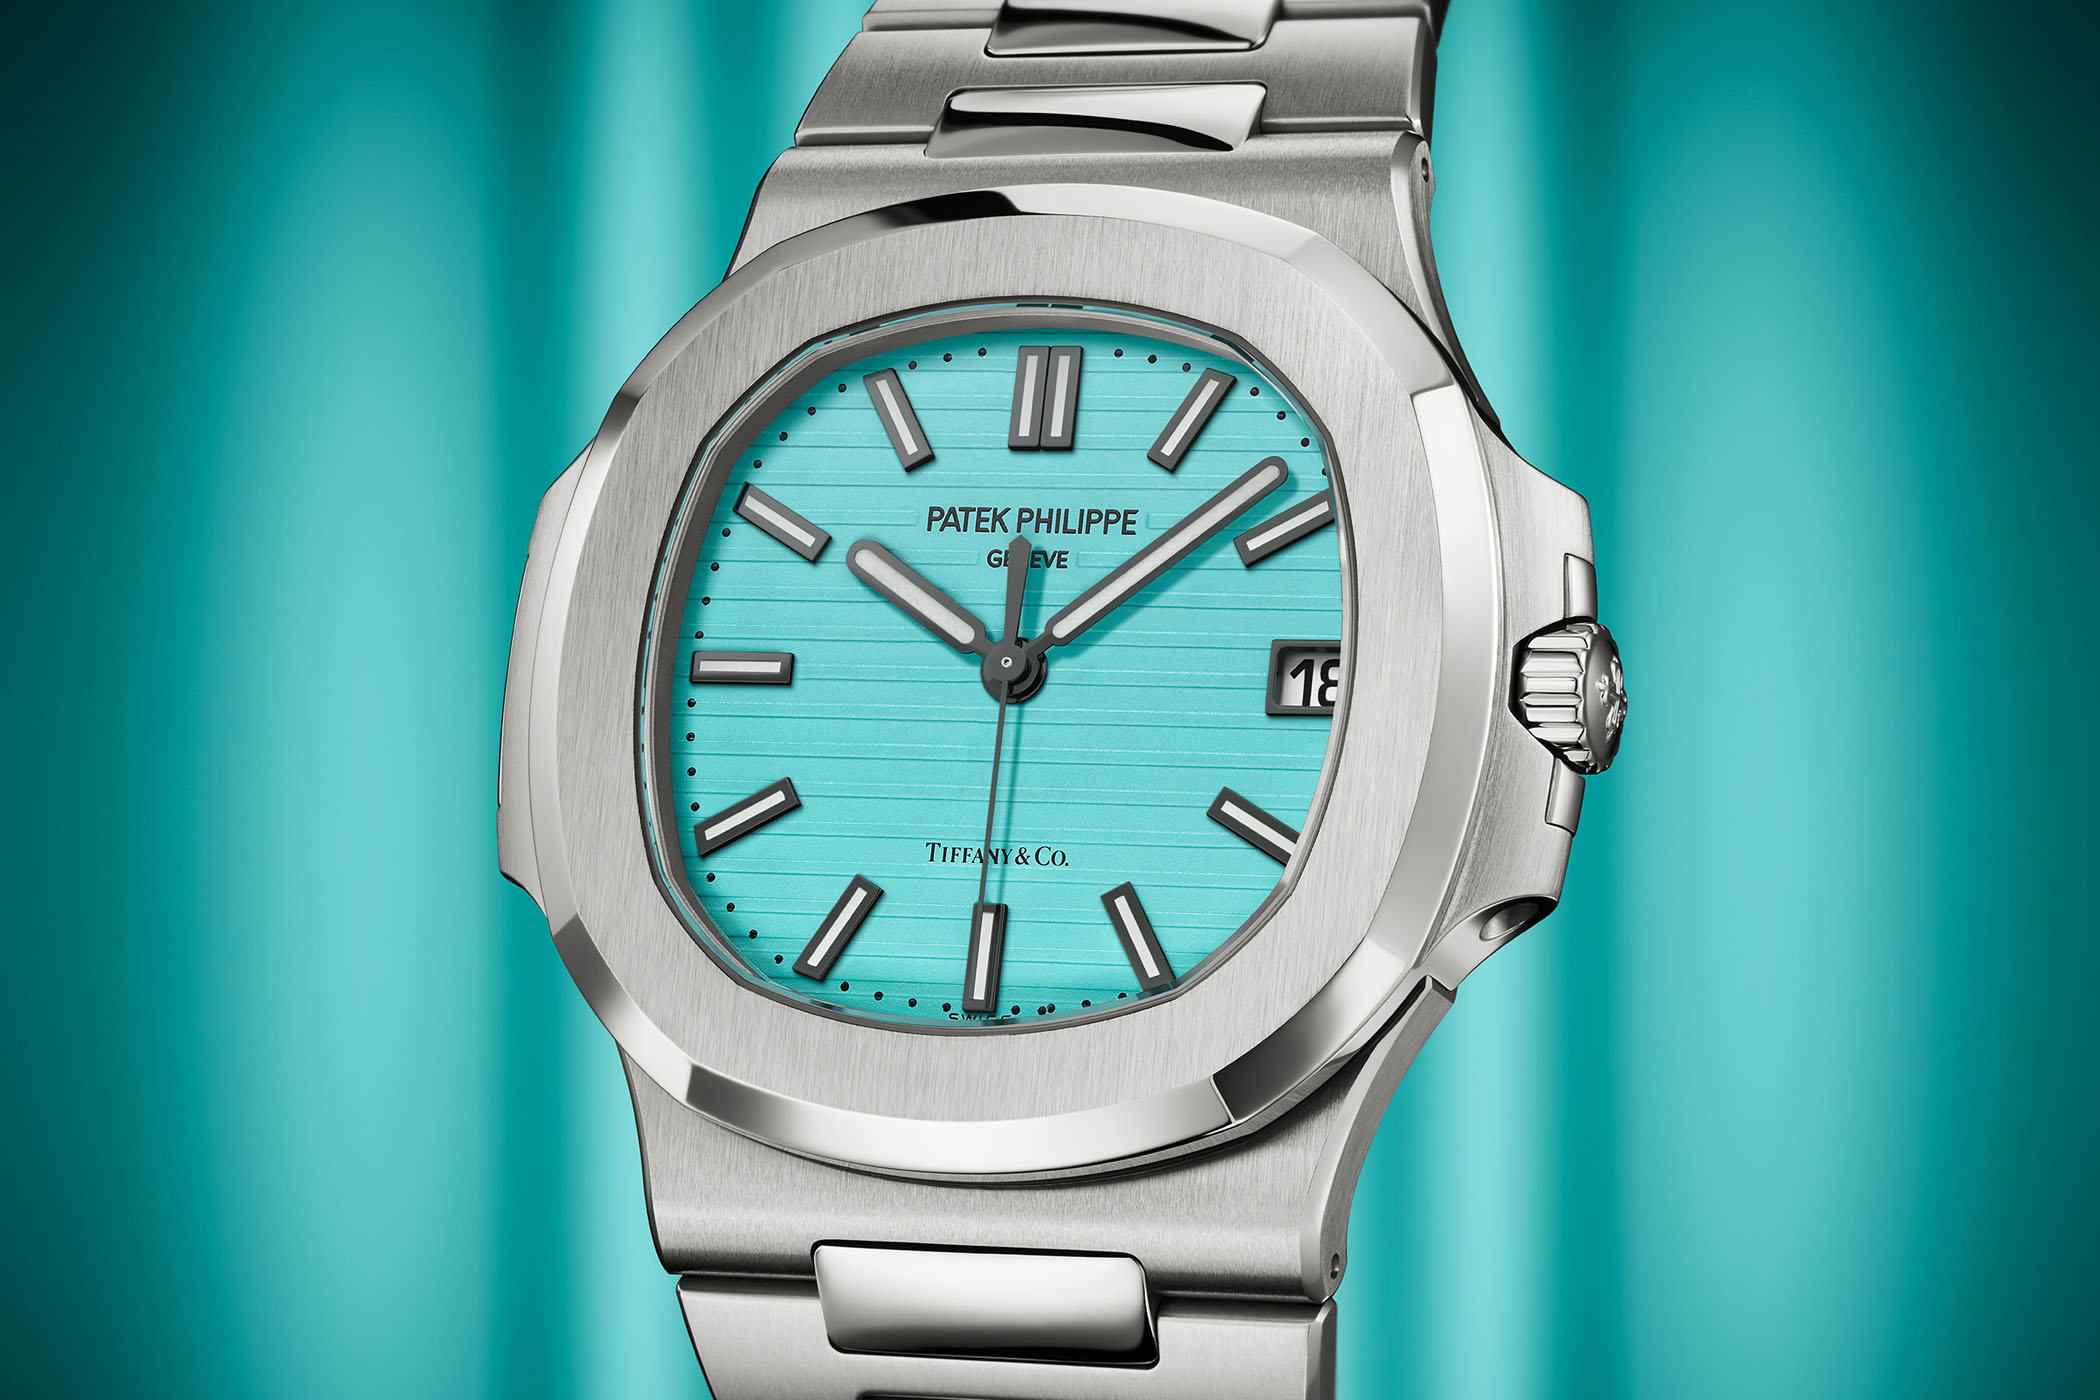 Patek Philippe Sa Most Expensive Watch | vlr.eng.br